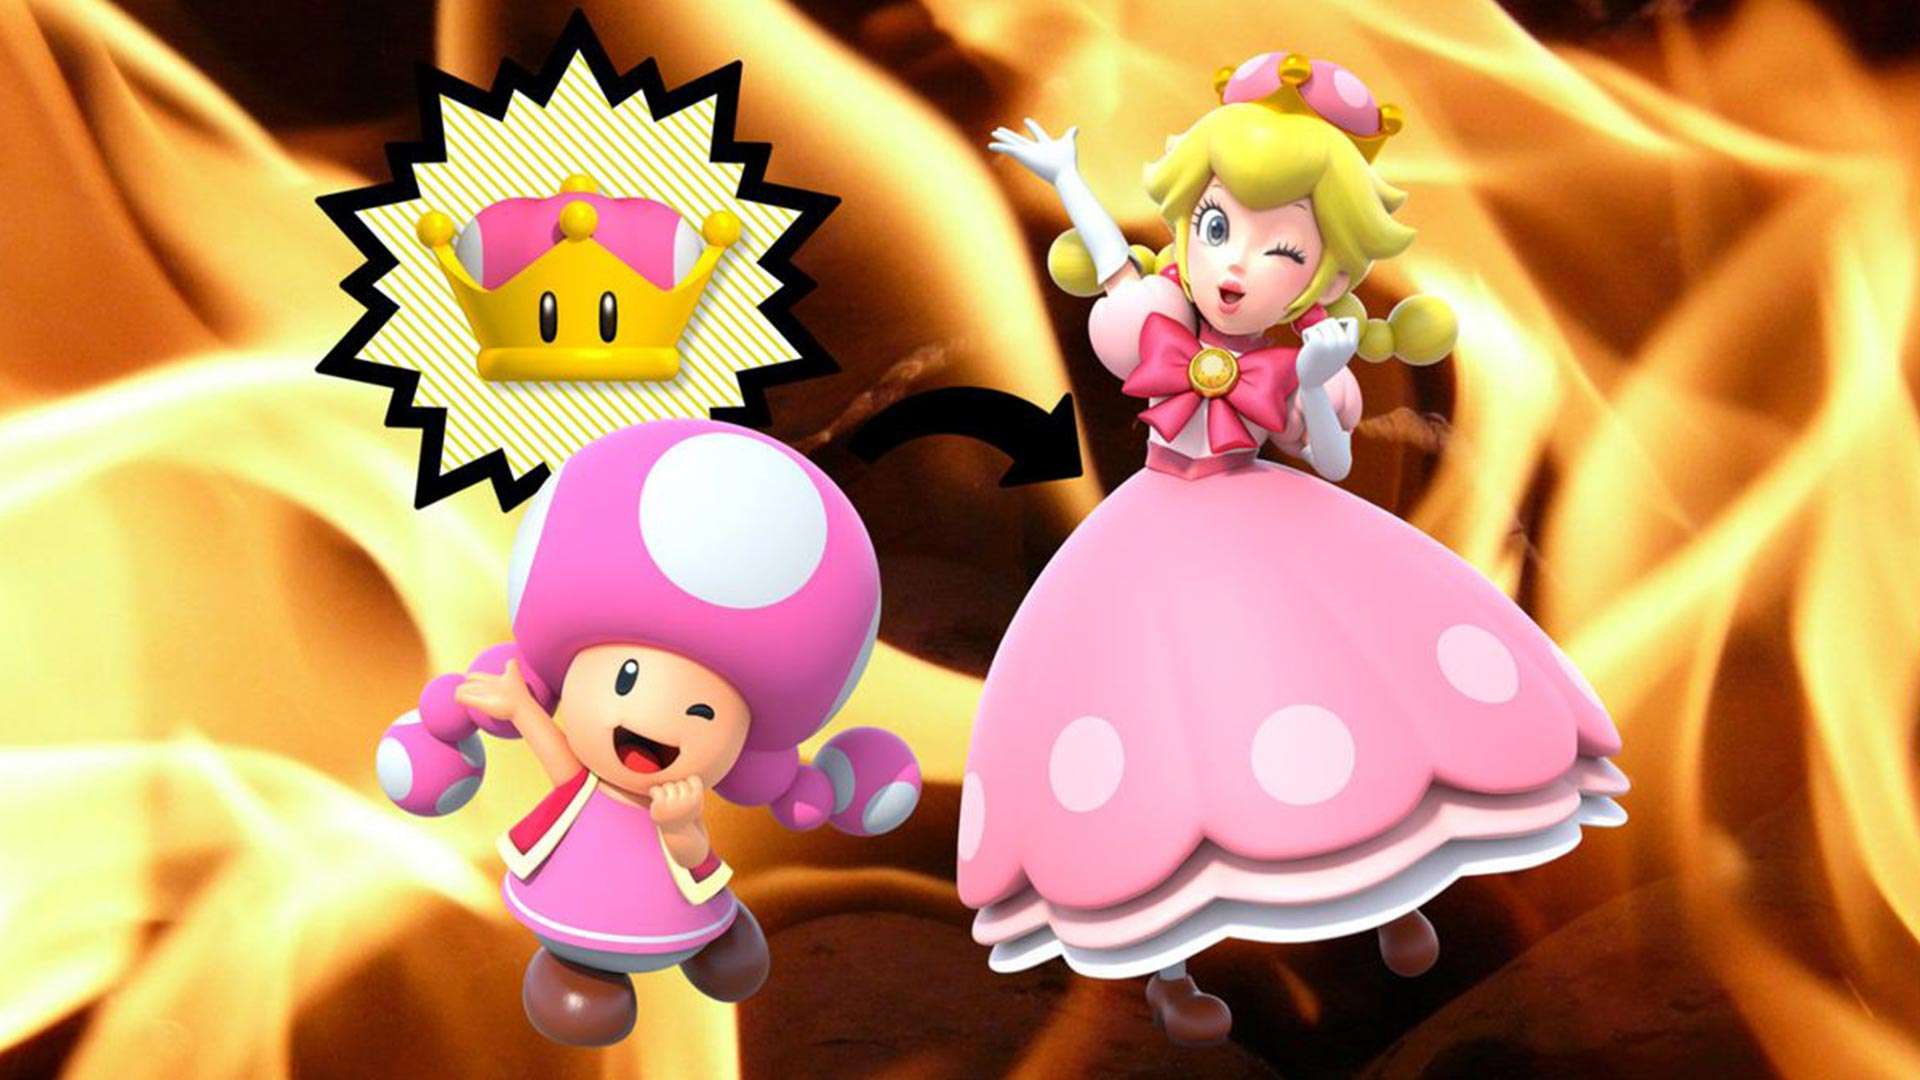 New Super Mario Bros U Deluxe Gives Toadette a Questionable Ability